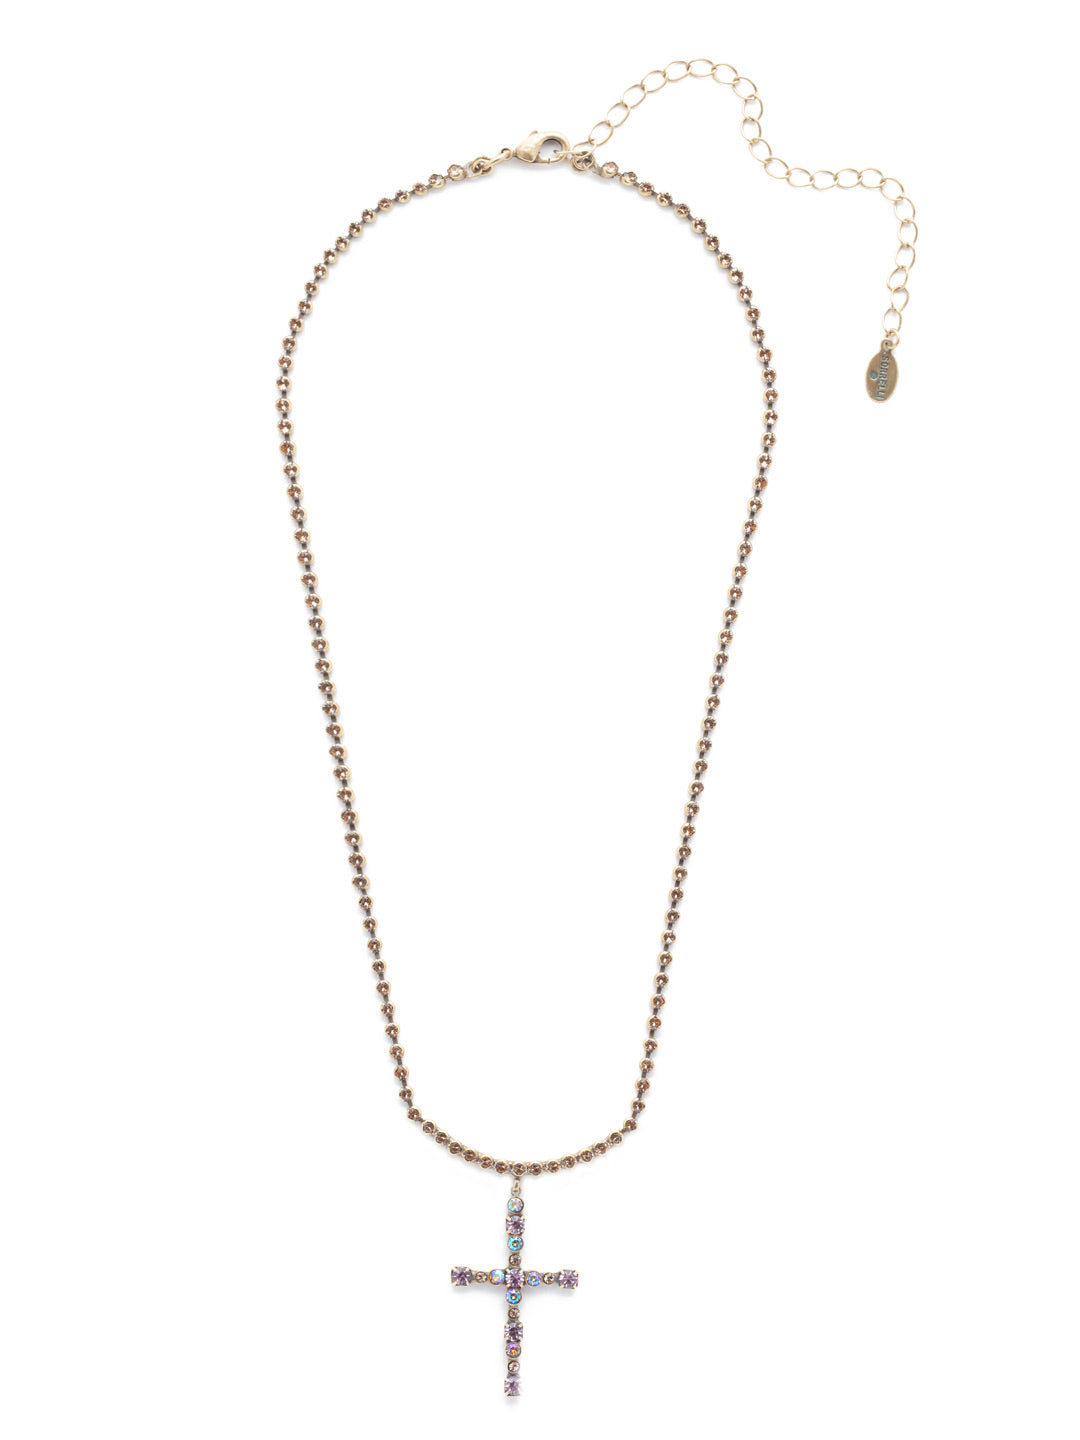 Annalise Cross Pendant Necklace - NEX1AGMIR - <p>The Annalise Cross Pendant Necklace features a single cross pendant covered in crystals, hanging from a crystal-studded adjustable chain with a lobster clasp closure. From Sorrelli's Mirage collection in our Antique Gold-tone finish.</p>